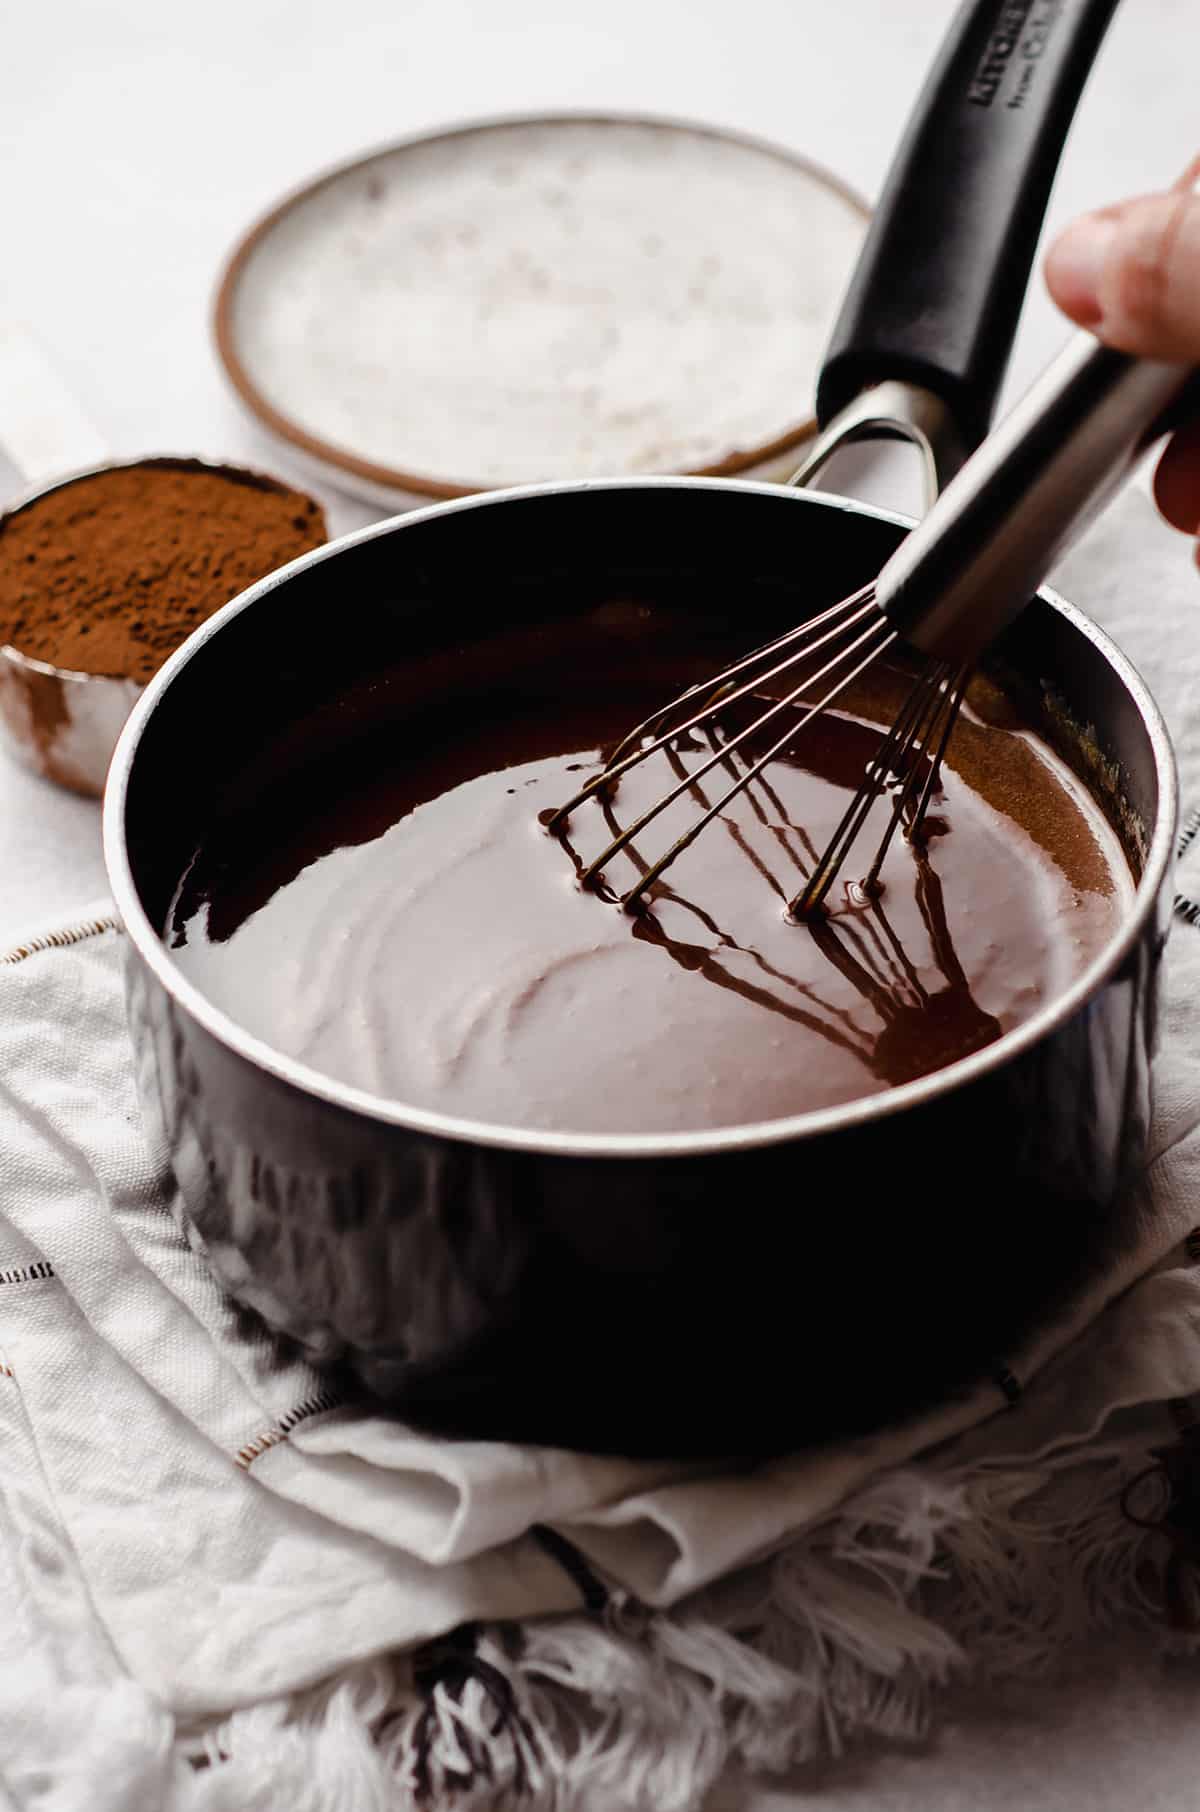 whisking ingredients together in a saucepan for homemade hot fudge sauce